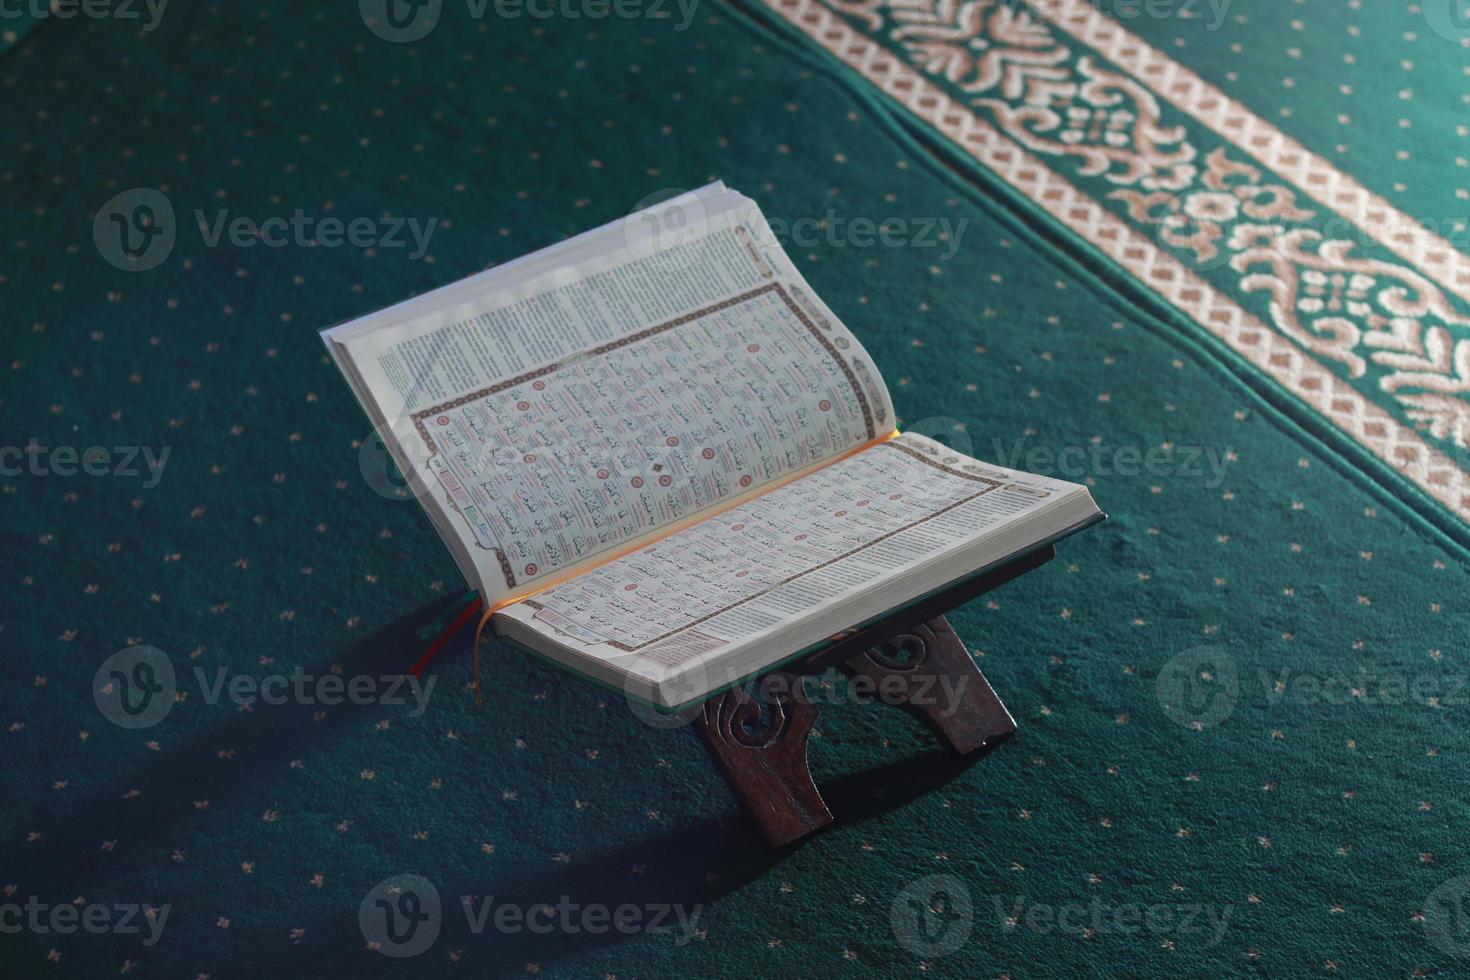 a close up of the holy book Al-Quran on a green prayer rug. Islamic photo concept.